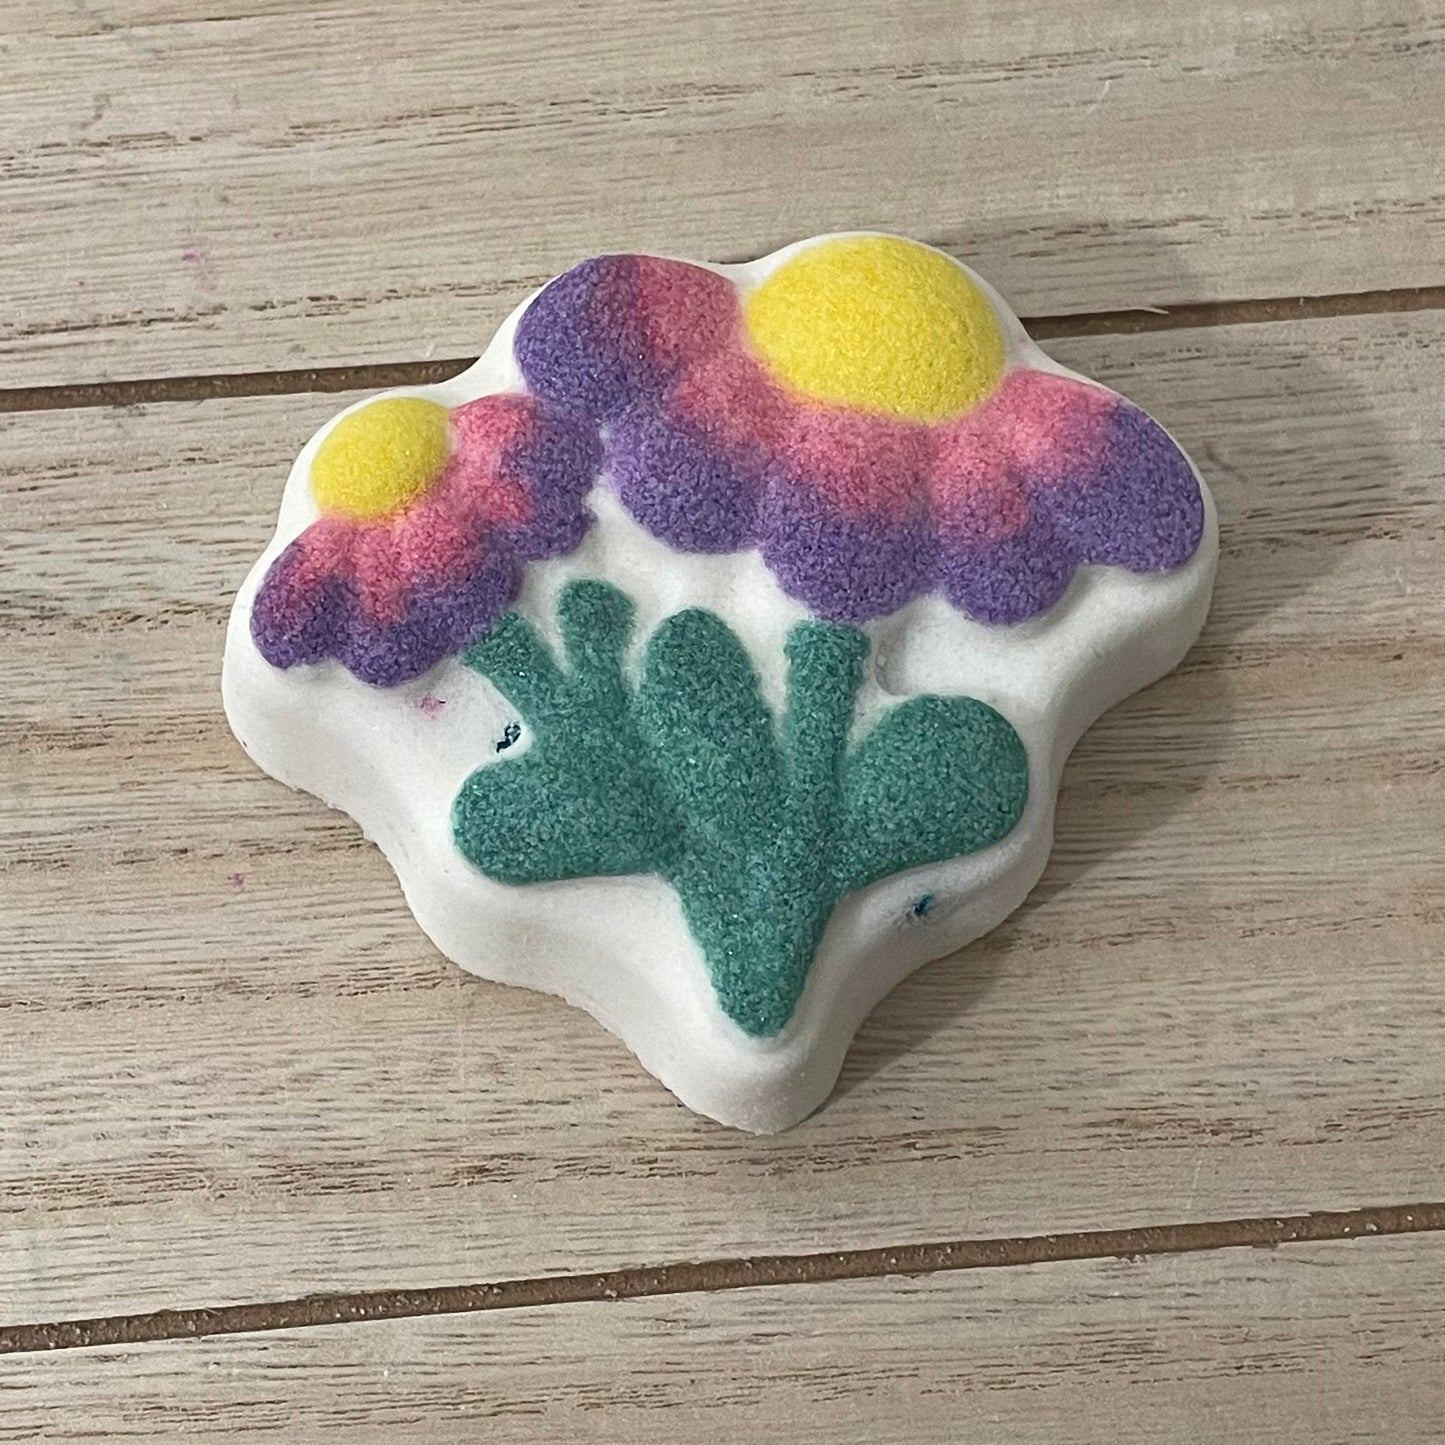 Spring Flowers Mold Series